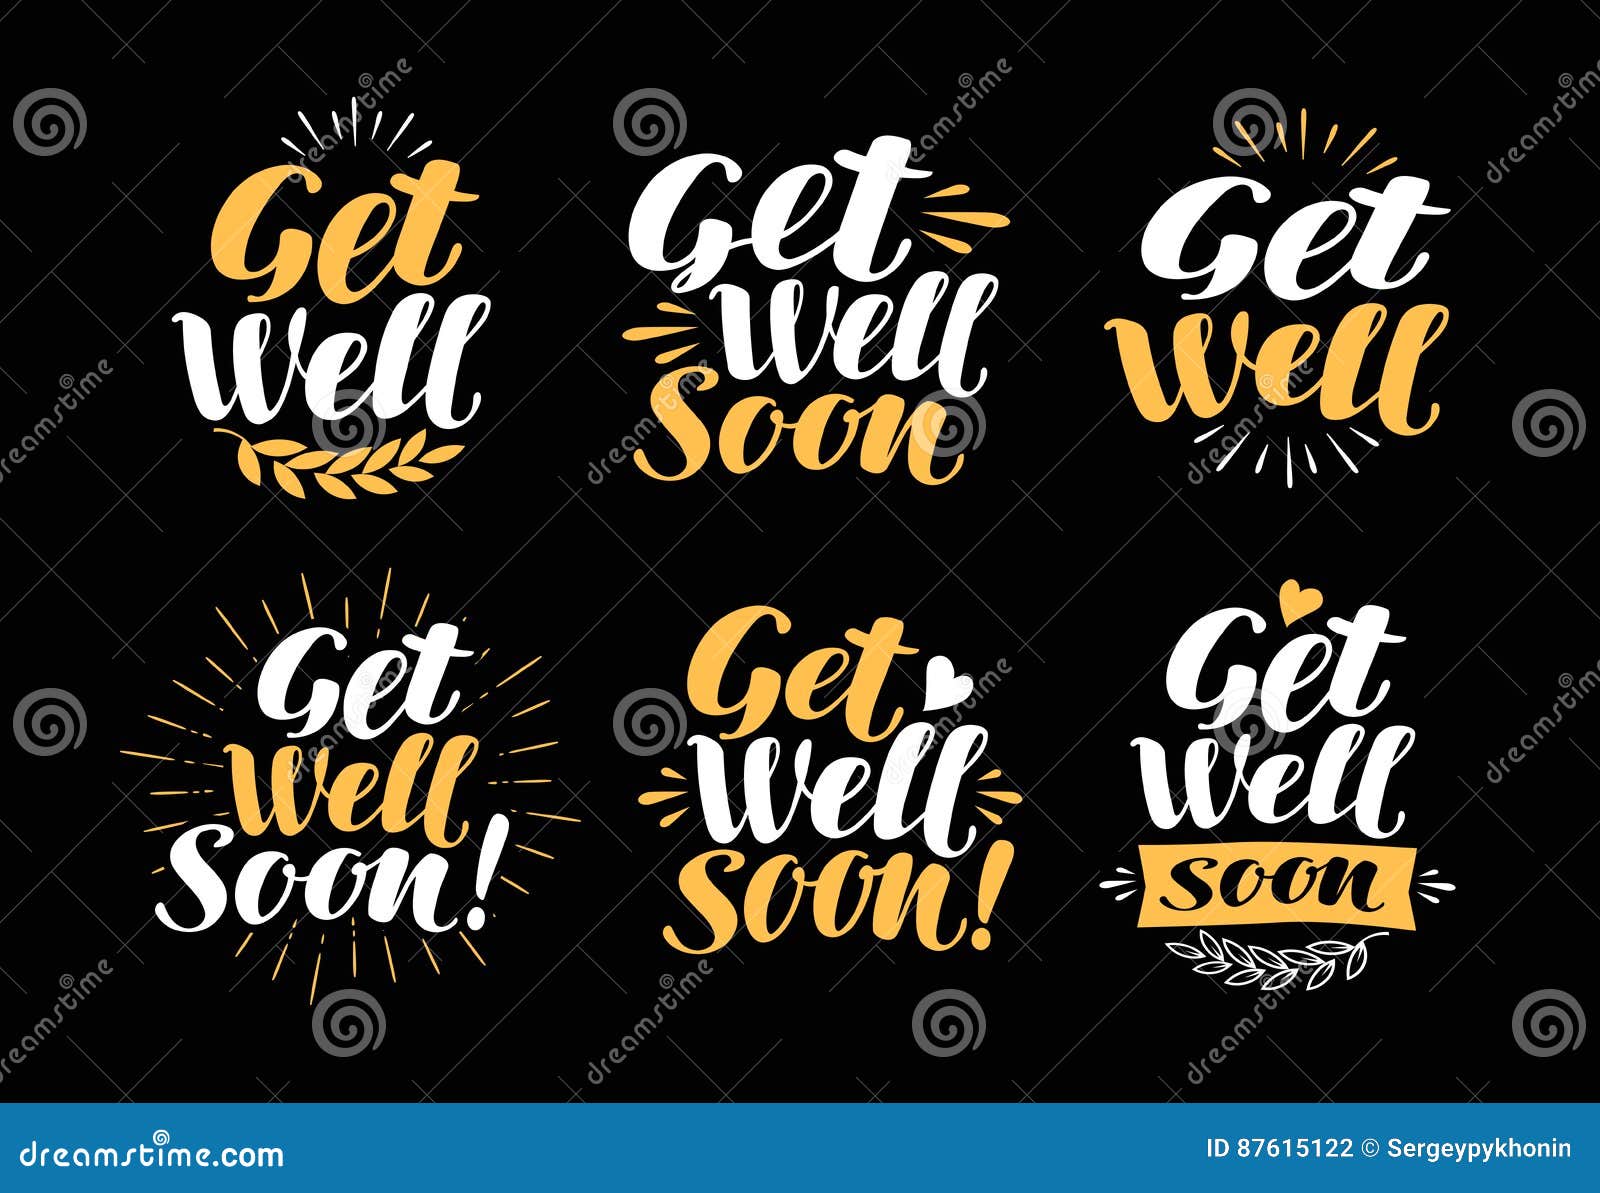 Get Well Soon Card With Teddy Bear And Jam. Vector Illustrated